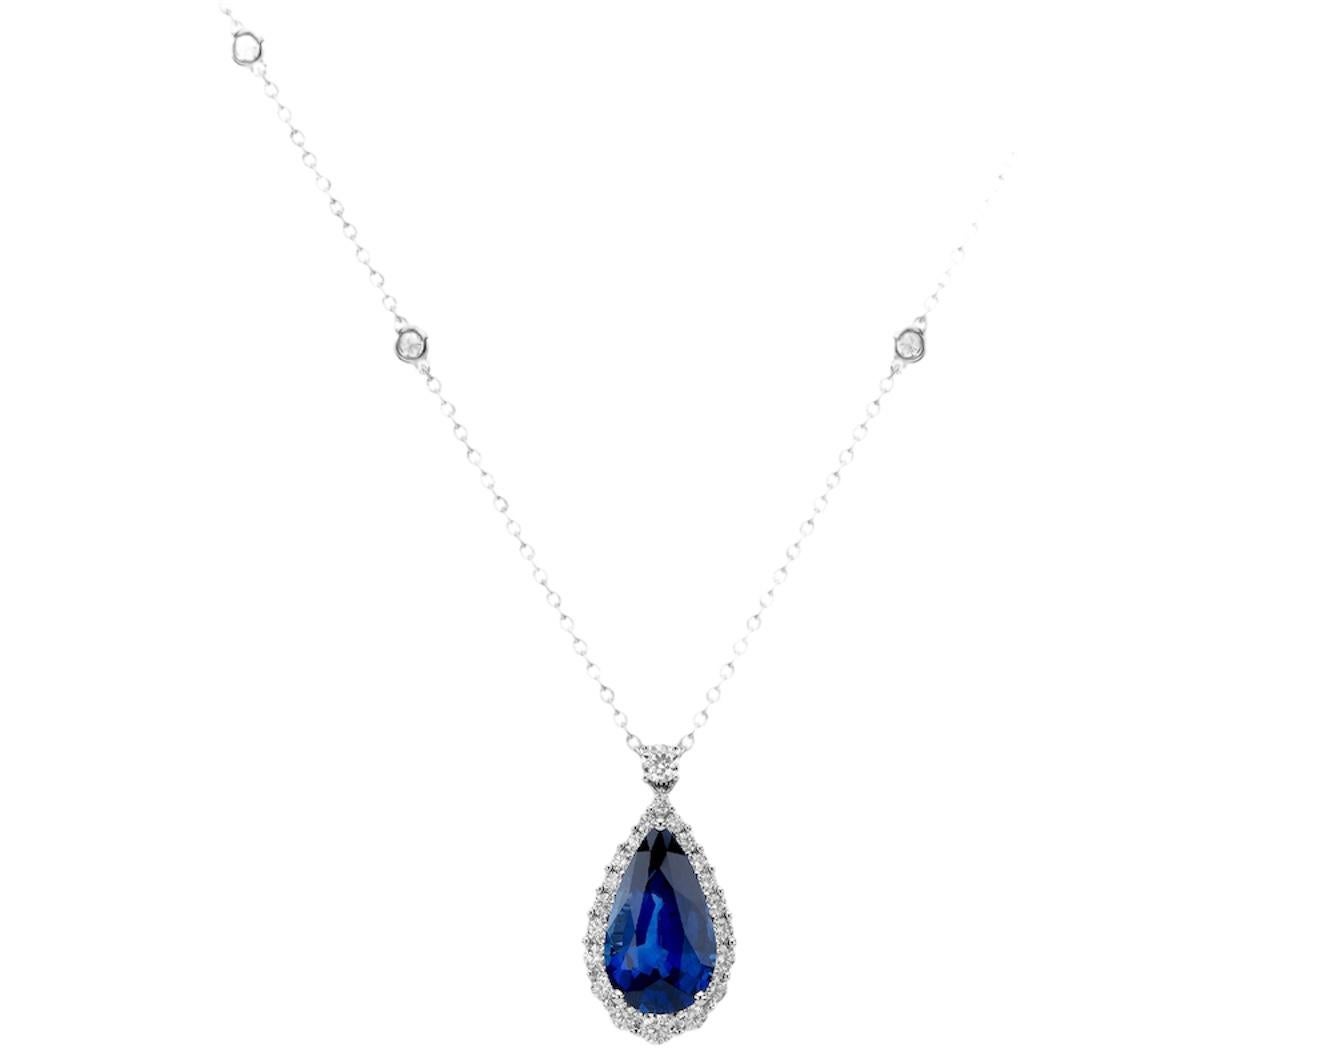 Centered upon a beautiful Pear shape Sapphire weighing 11.75 Carats that is accompanied by a GIA certificate. 
Surrounded by Round Diamonds weighing 1.05 Carats. 
Set in Platinum. 
Chain measures 18 inches. 